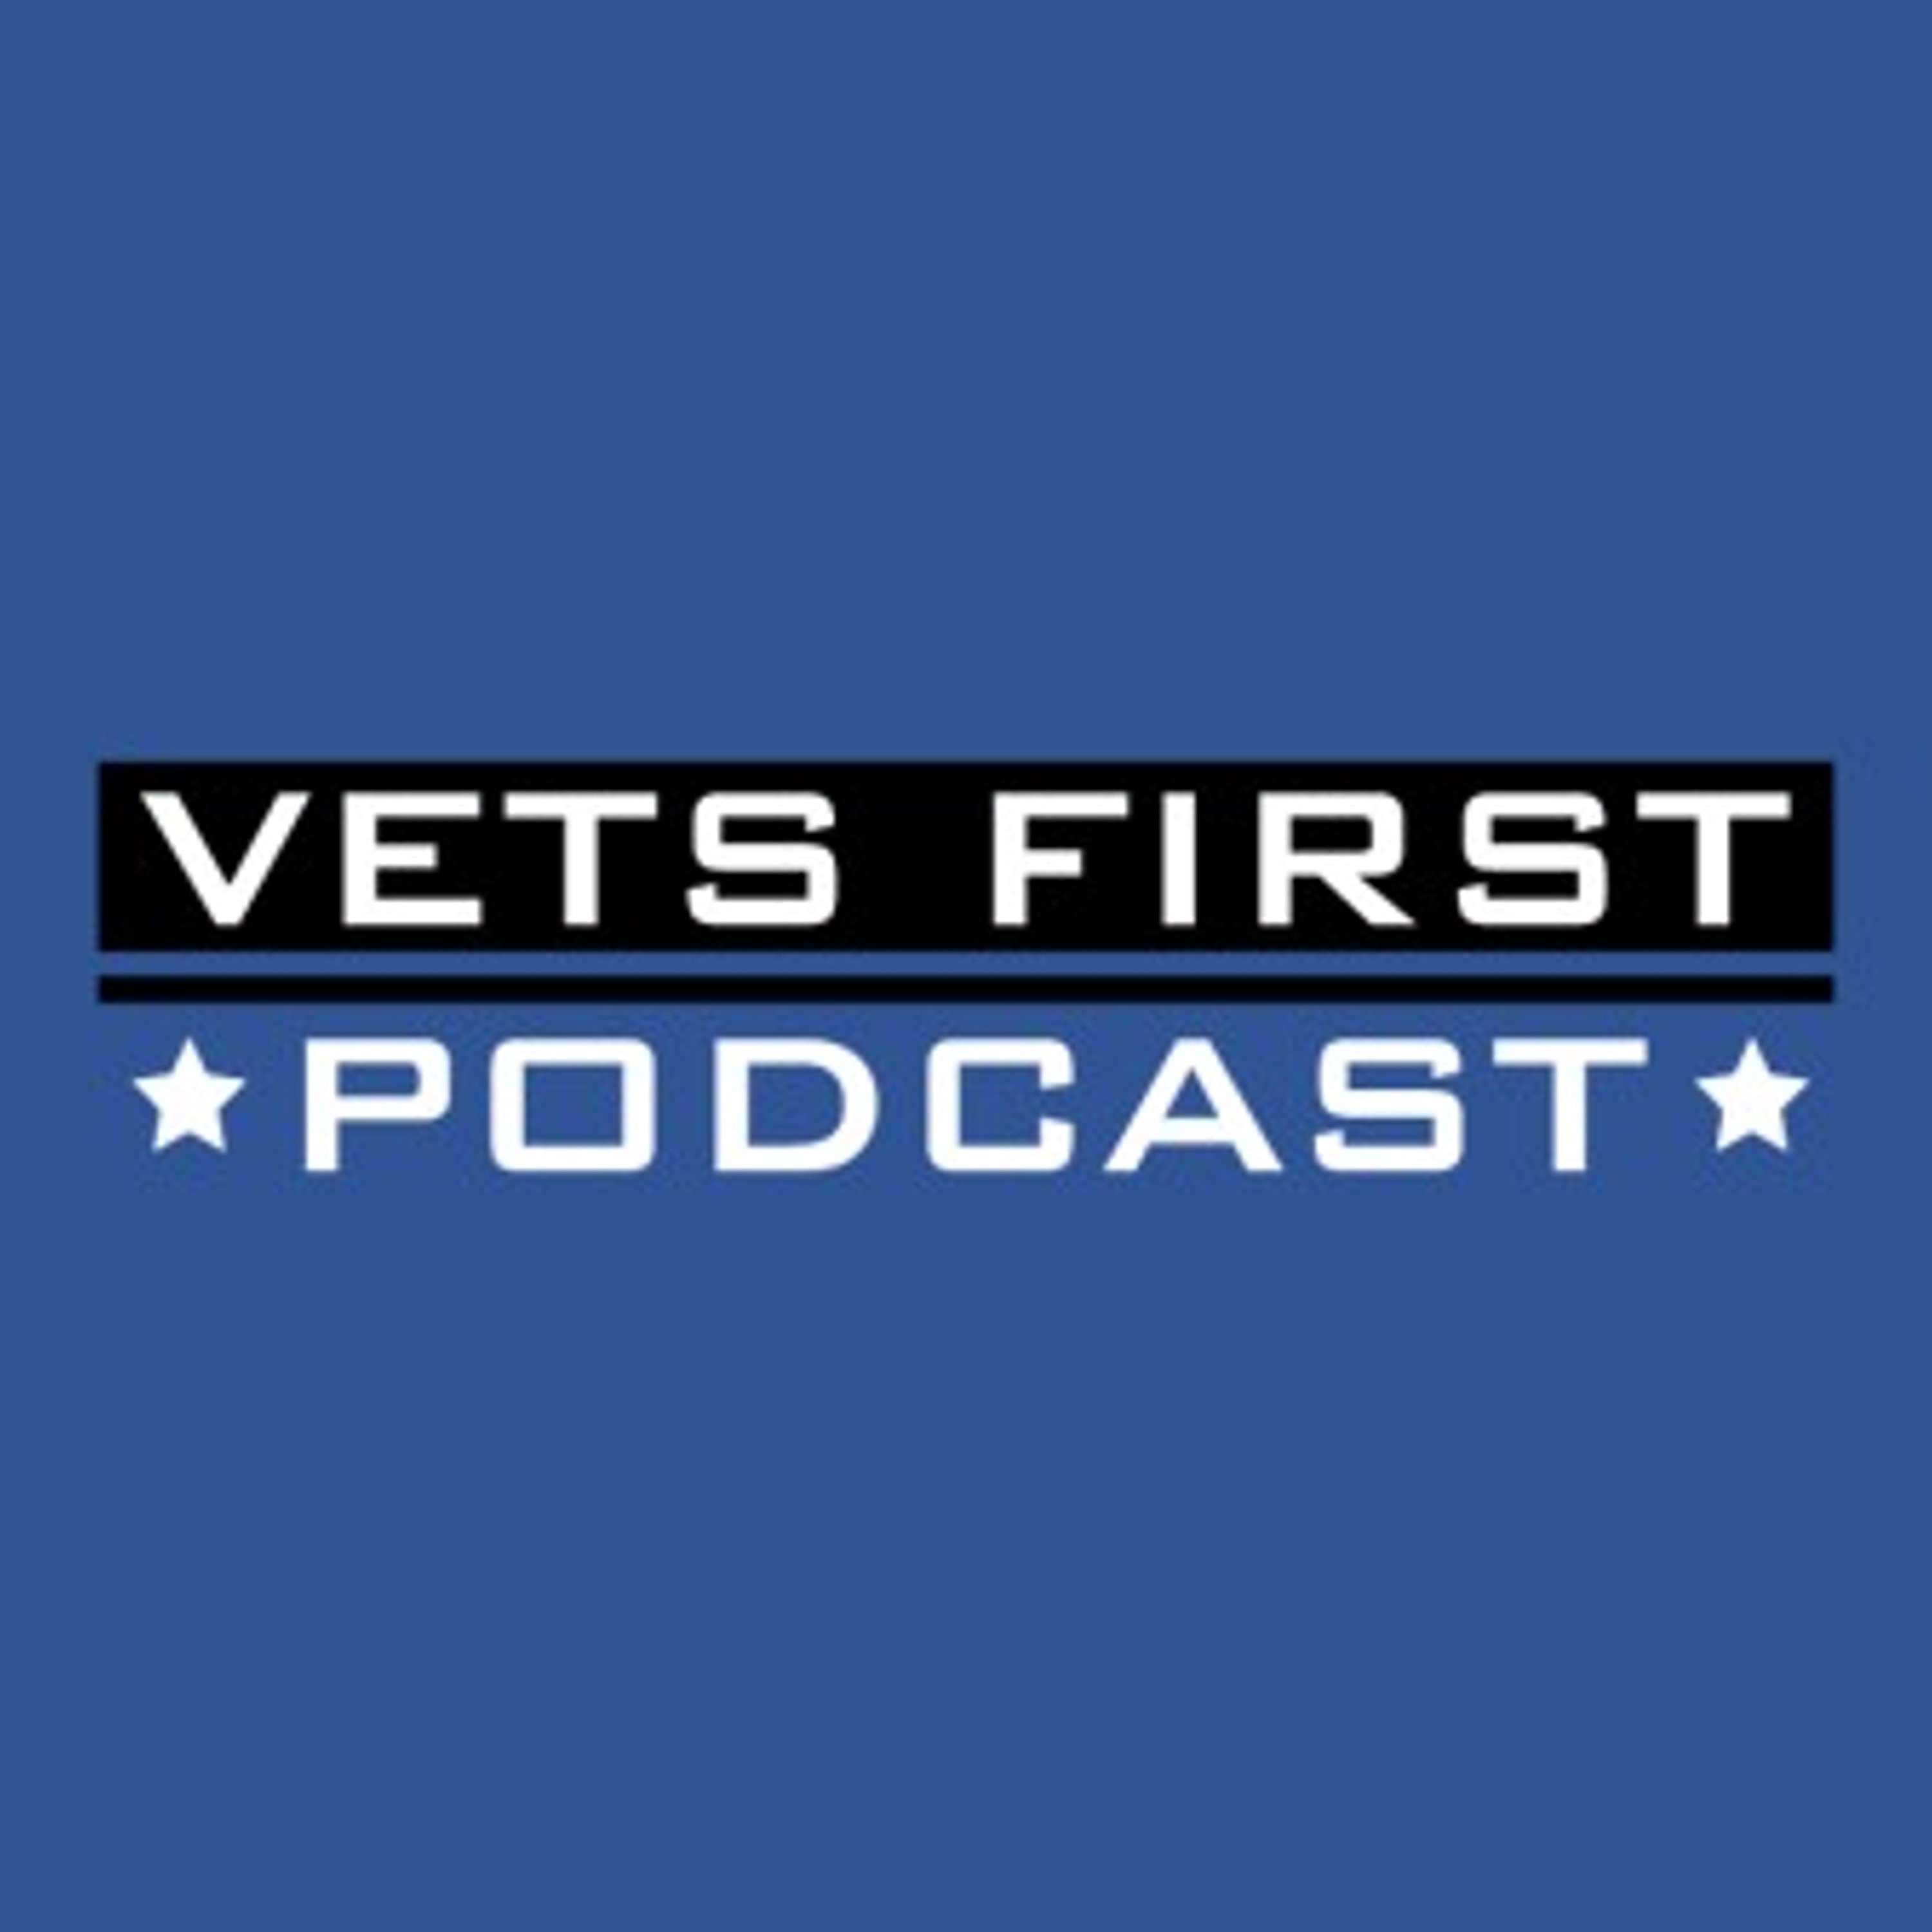 An introduction to the Vets First Podcast